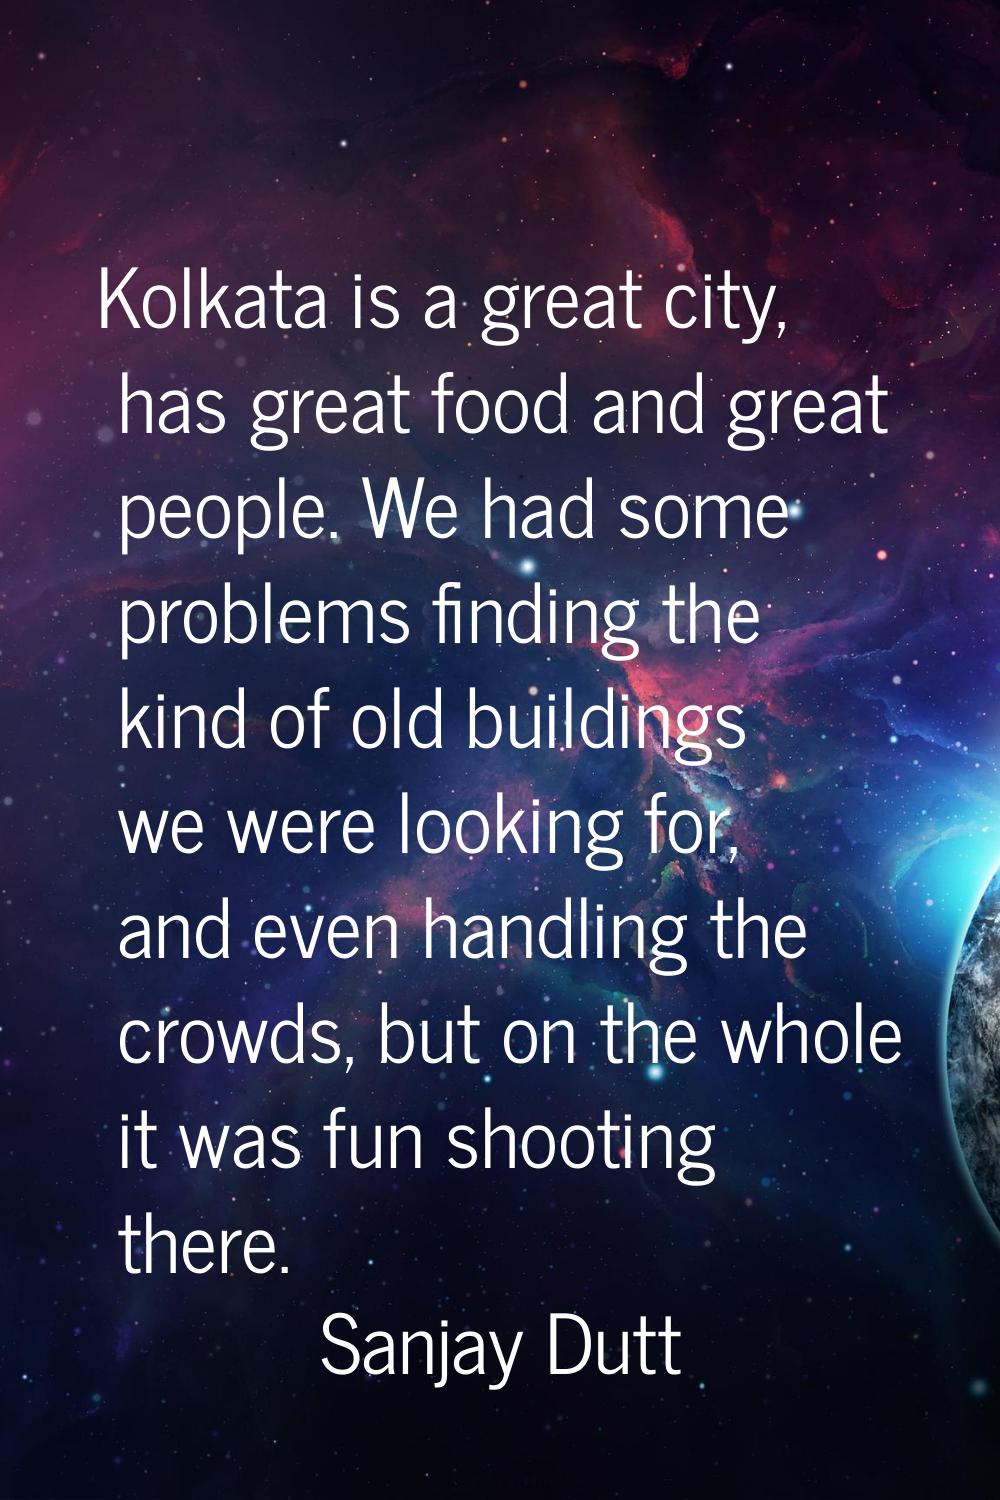 Kolkata is a great city, has great food and great people. We had some problems finding the kind of 